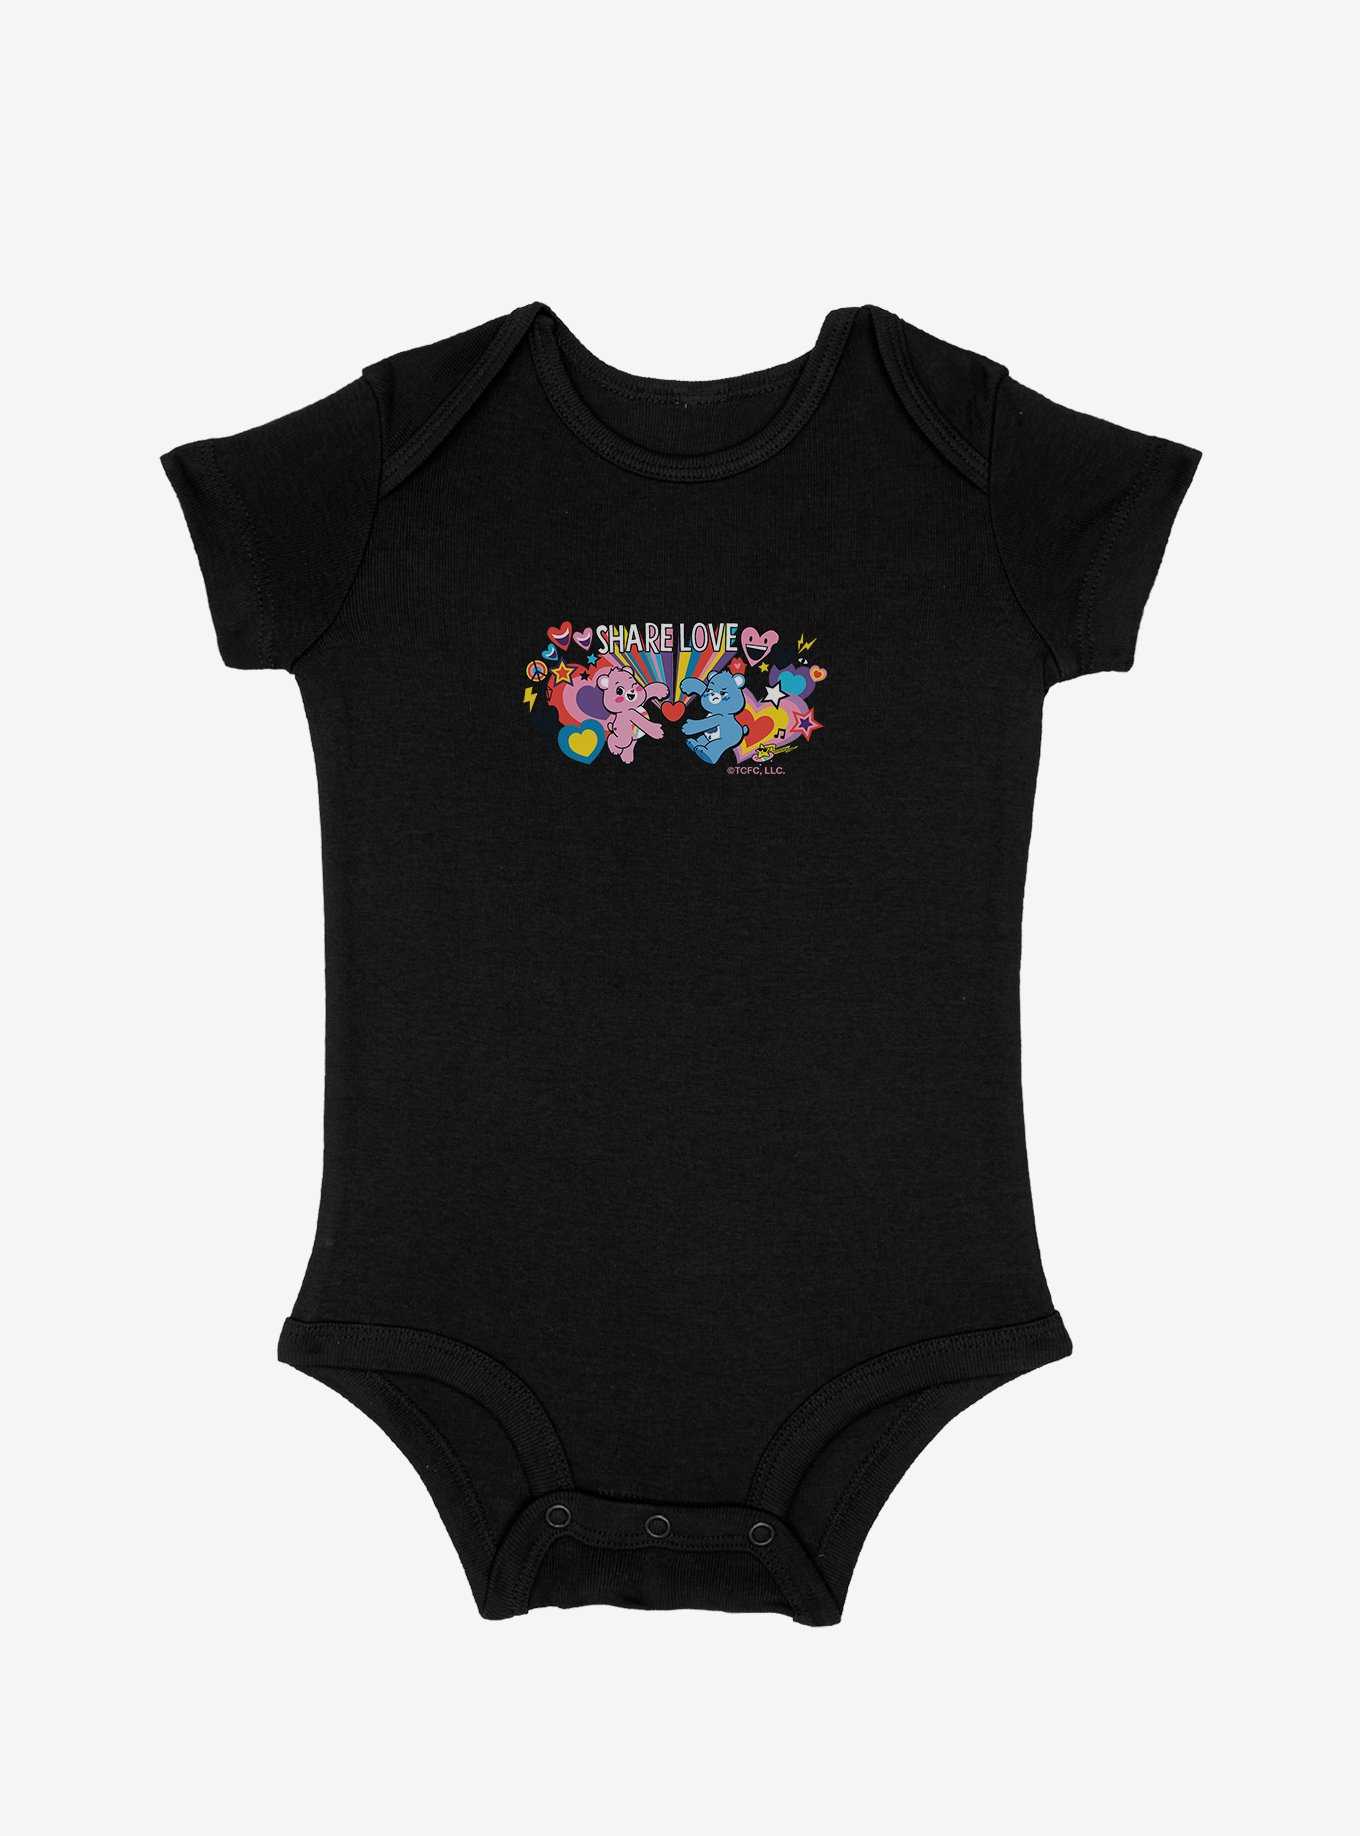 Care Bears Share Love Duo Infant Bodysuit, , hi-res